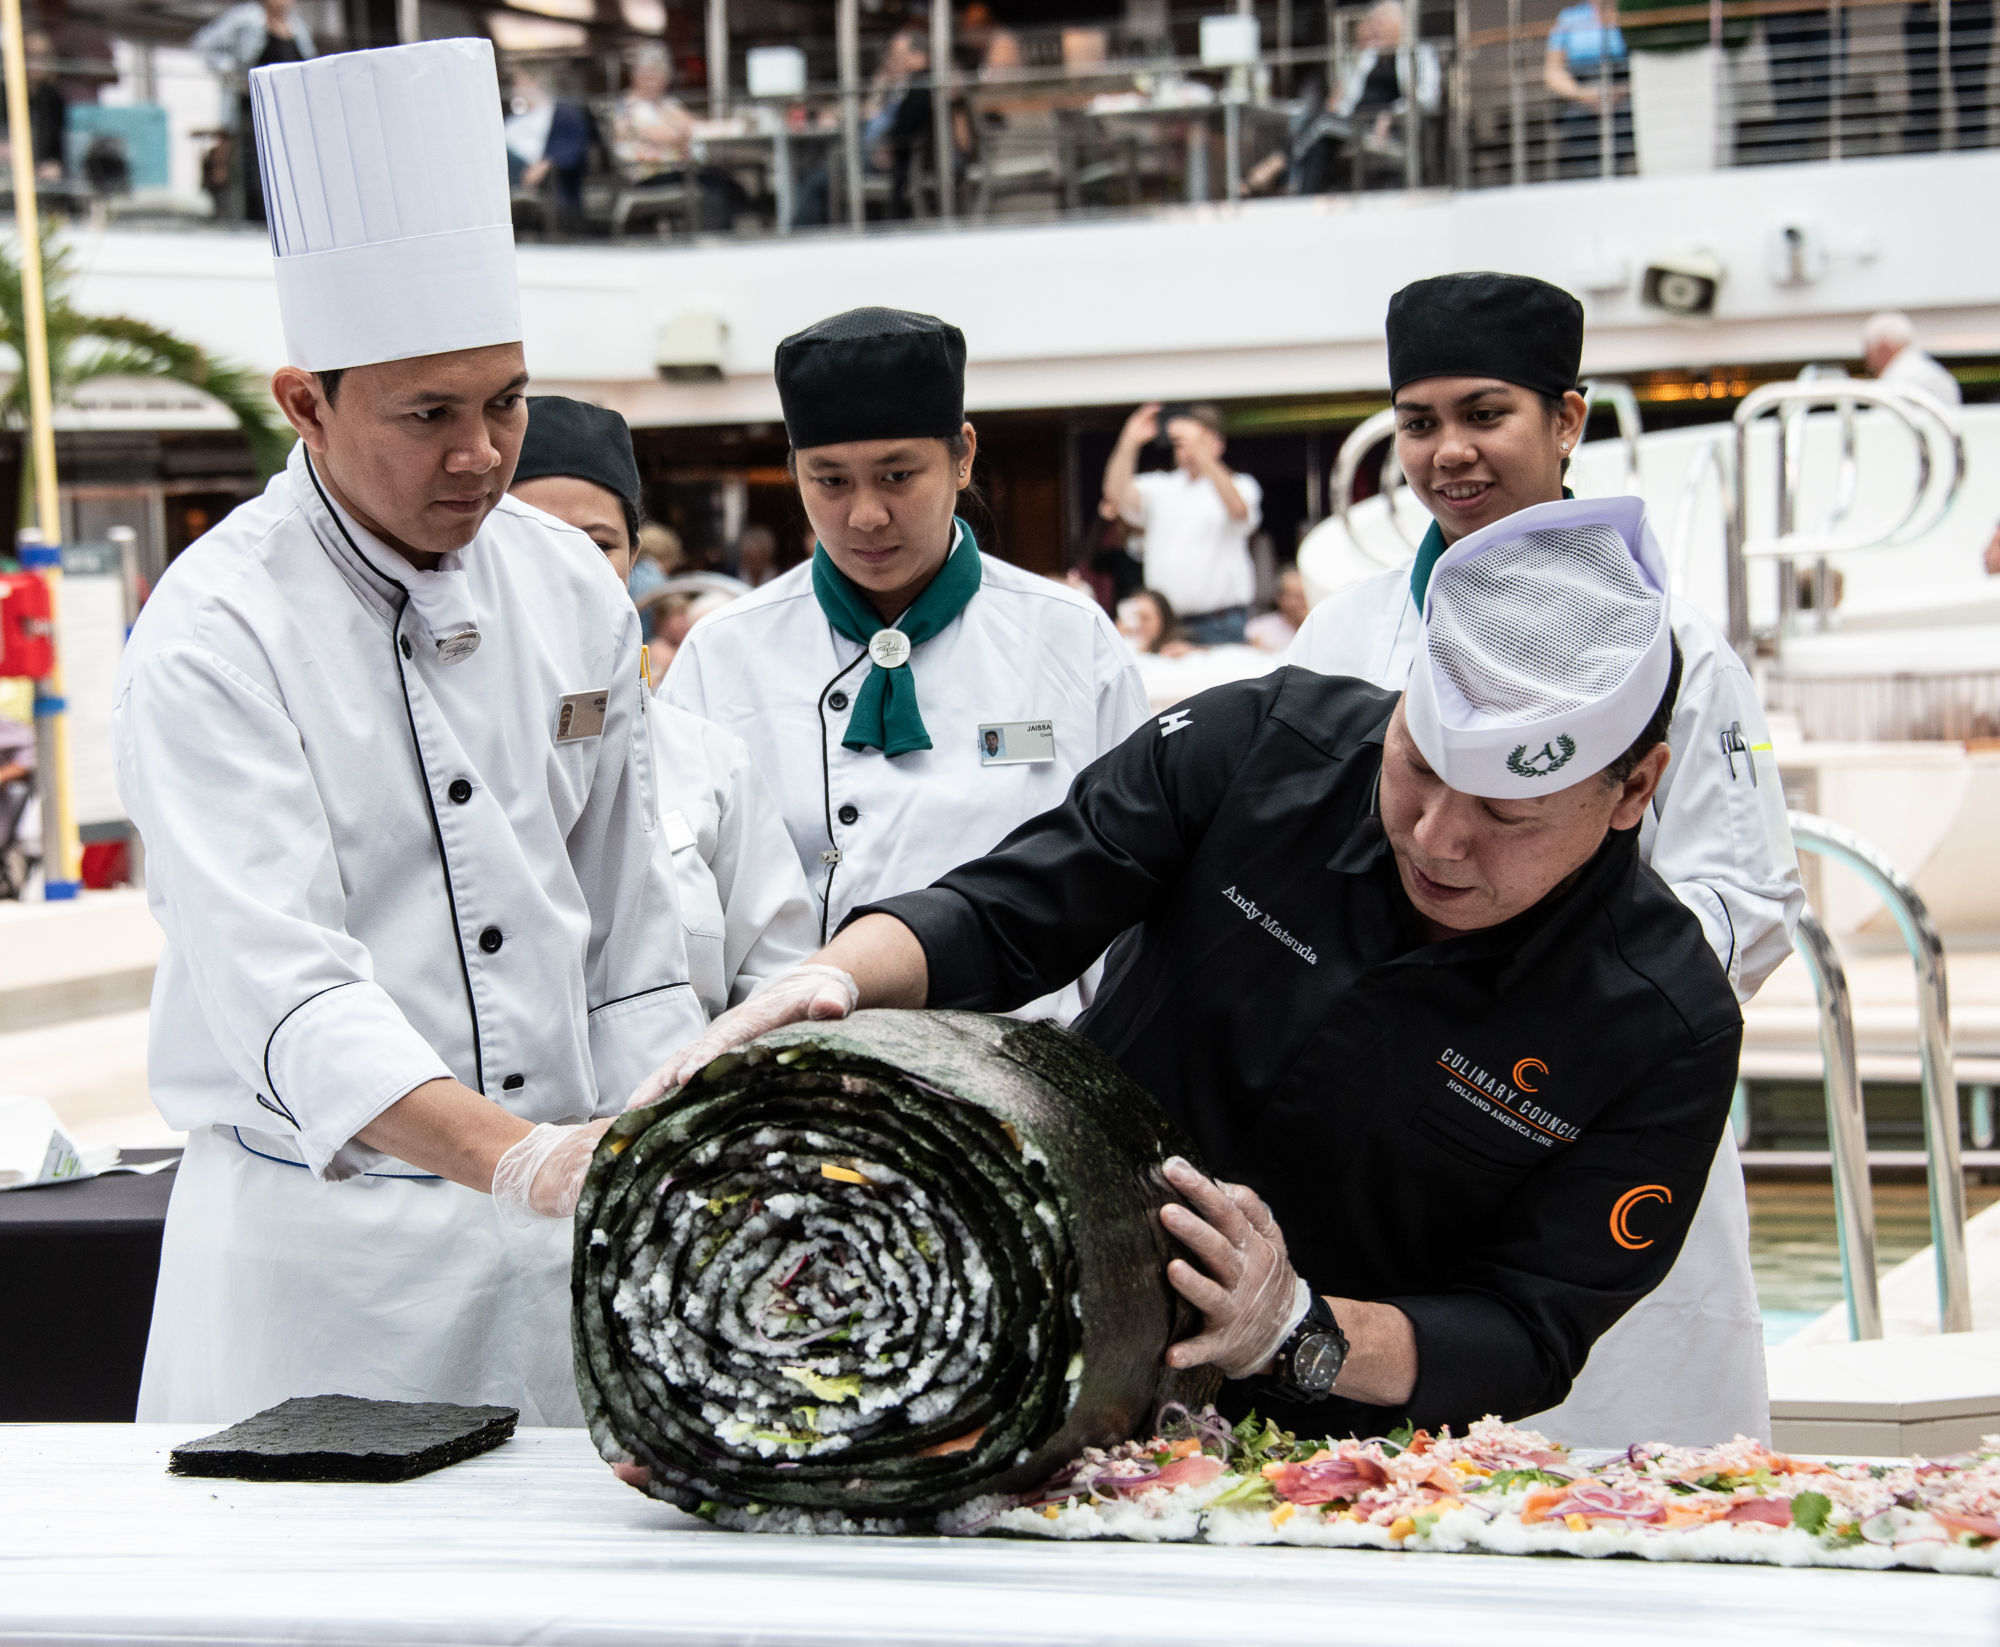 Sushi Lovers Must See These Photos of the ‘Largest Sushi Roll at Sea’